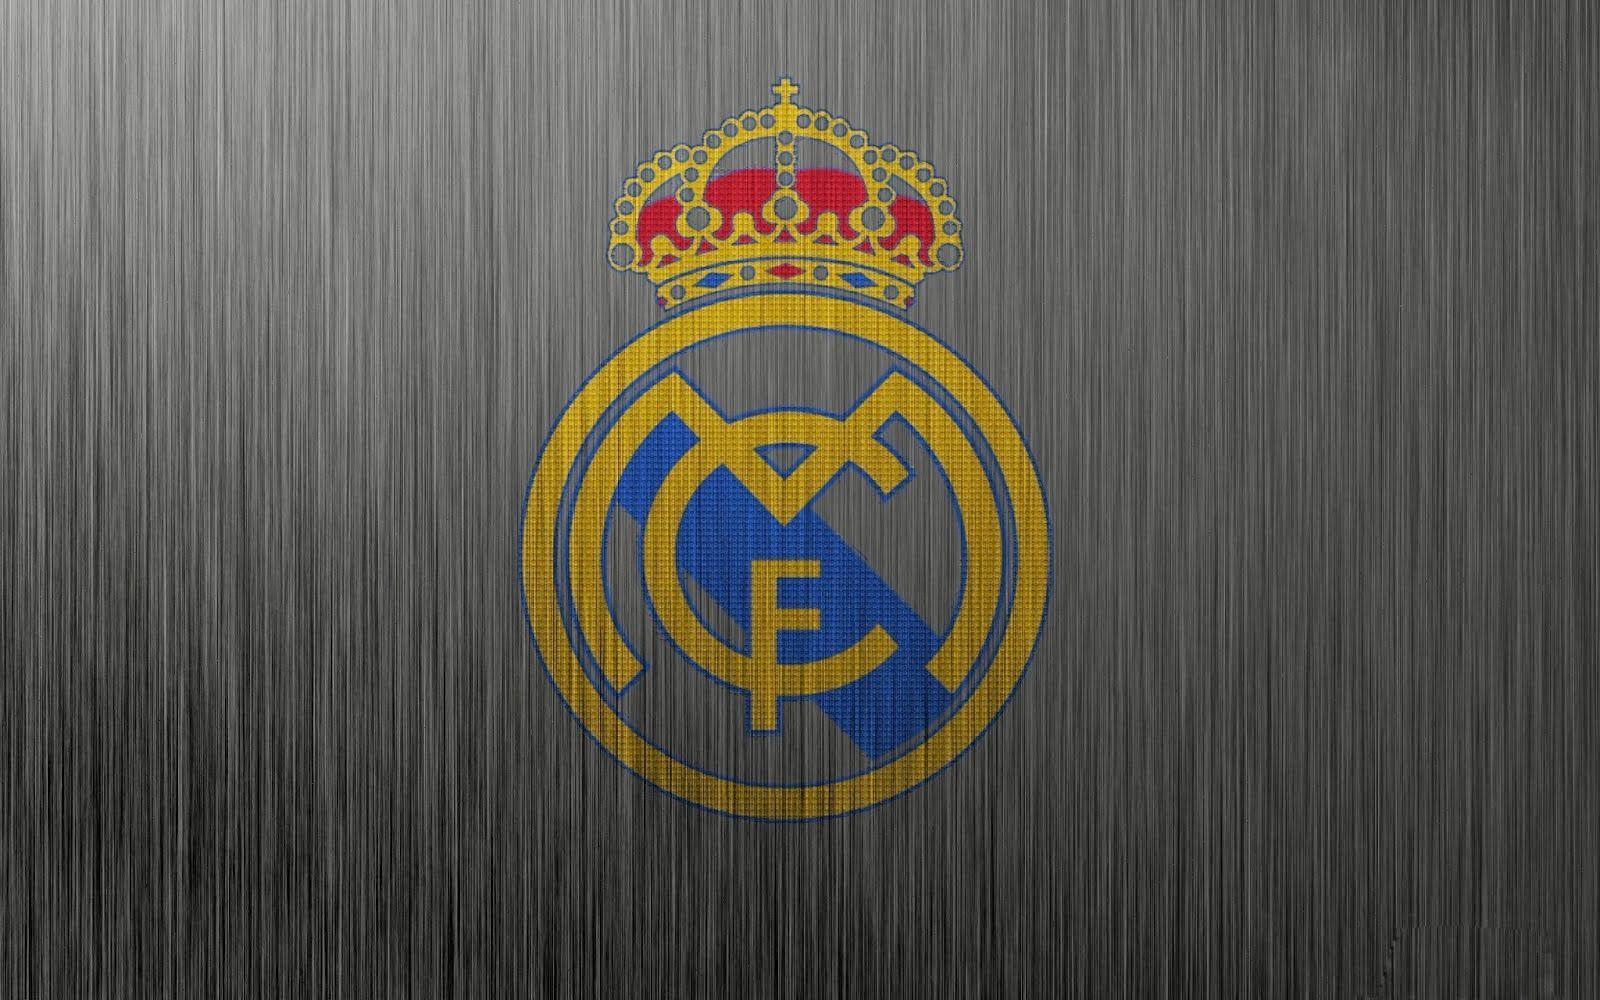 Real Madrid HD Wallpapers 2017 - Wallpaper Cave